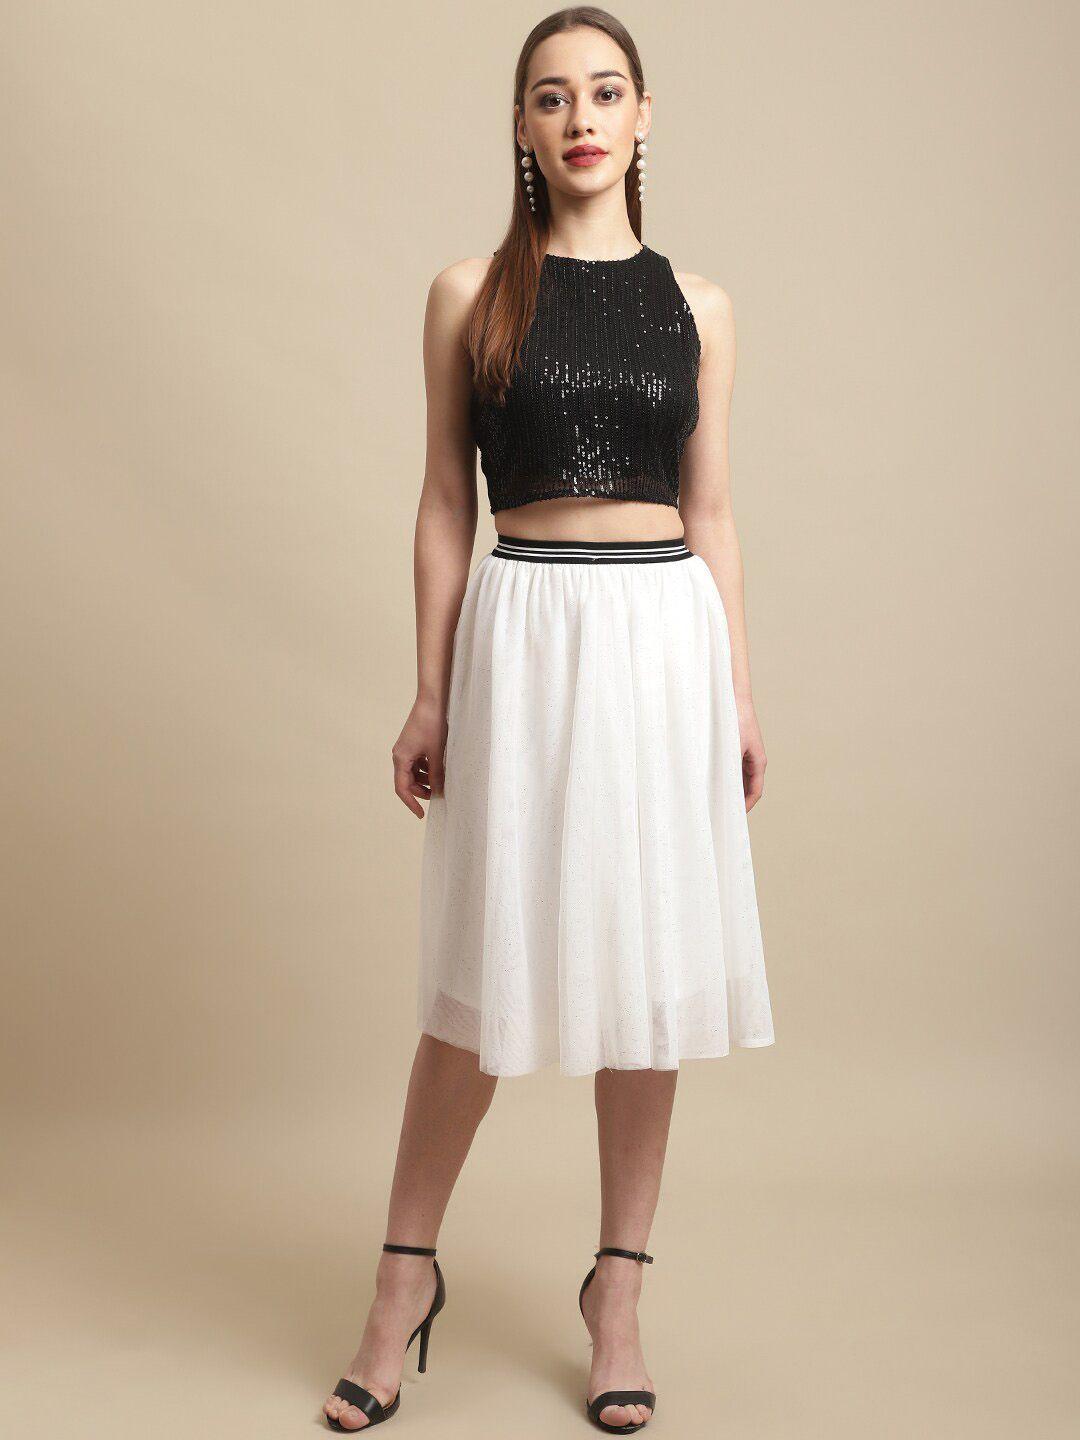 blanc9 women embellished top with skirt